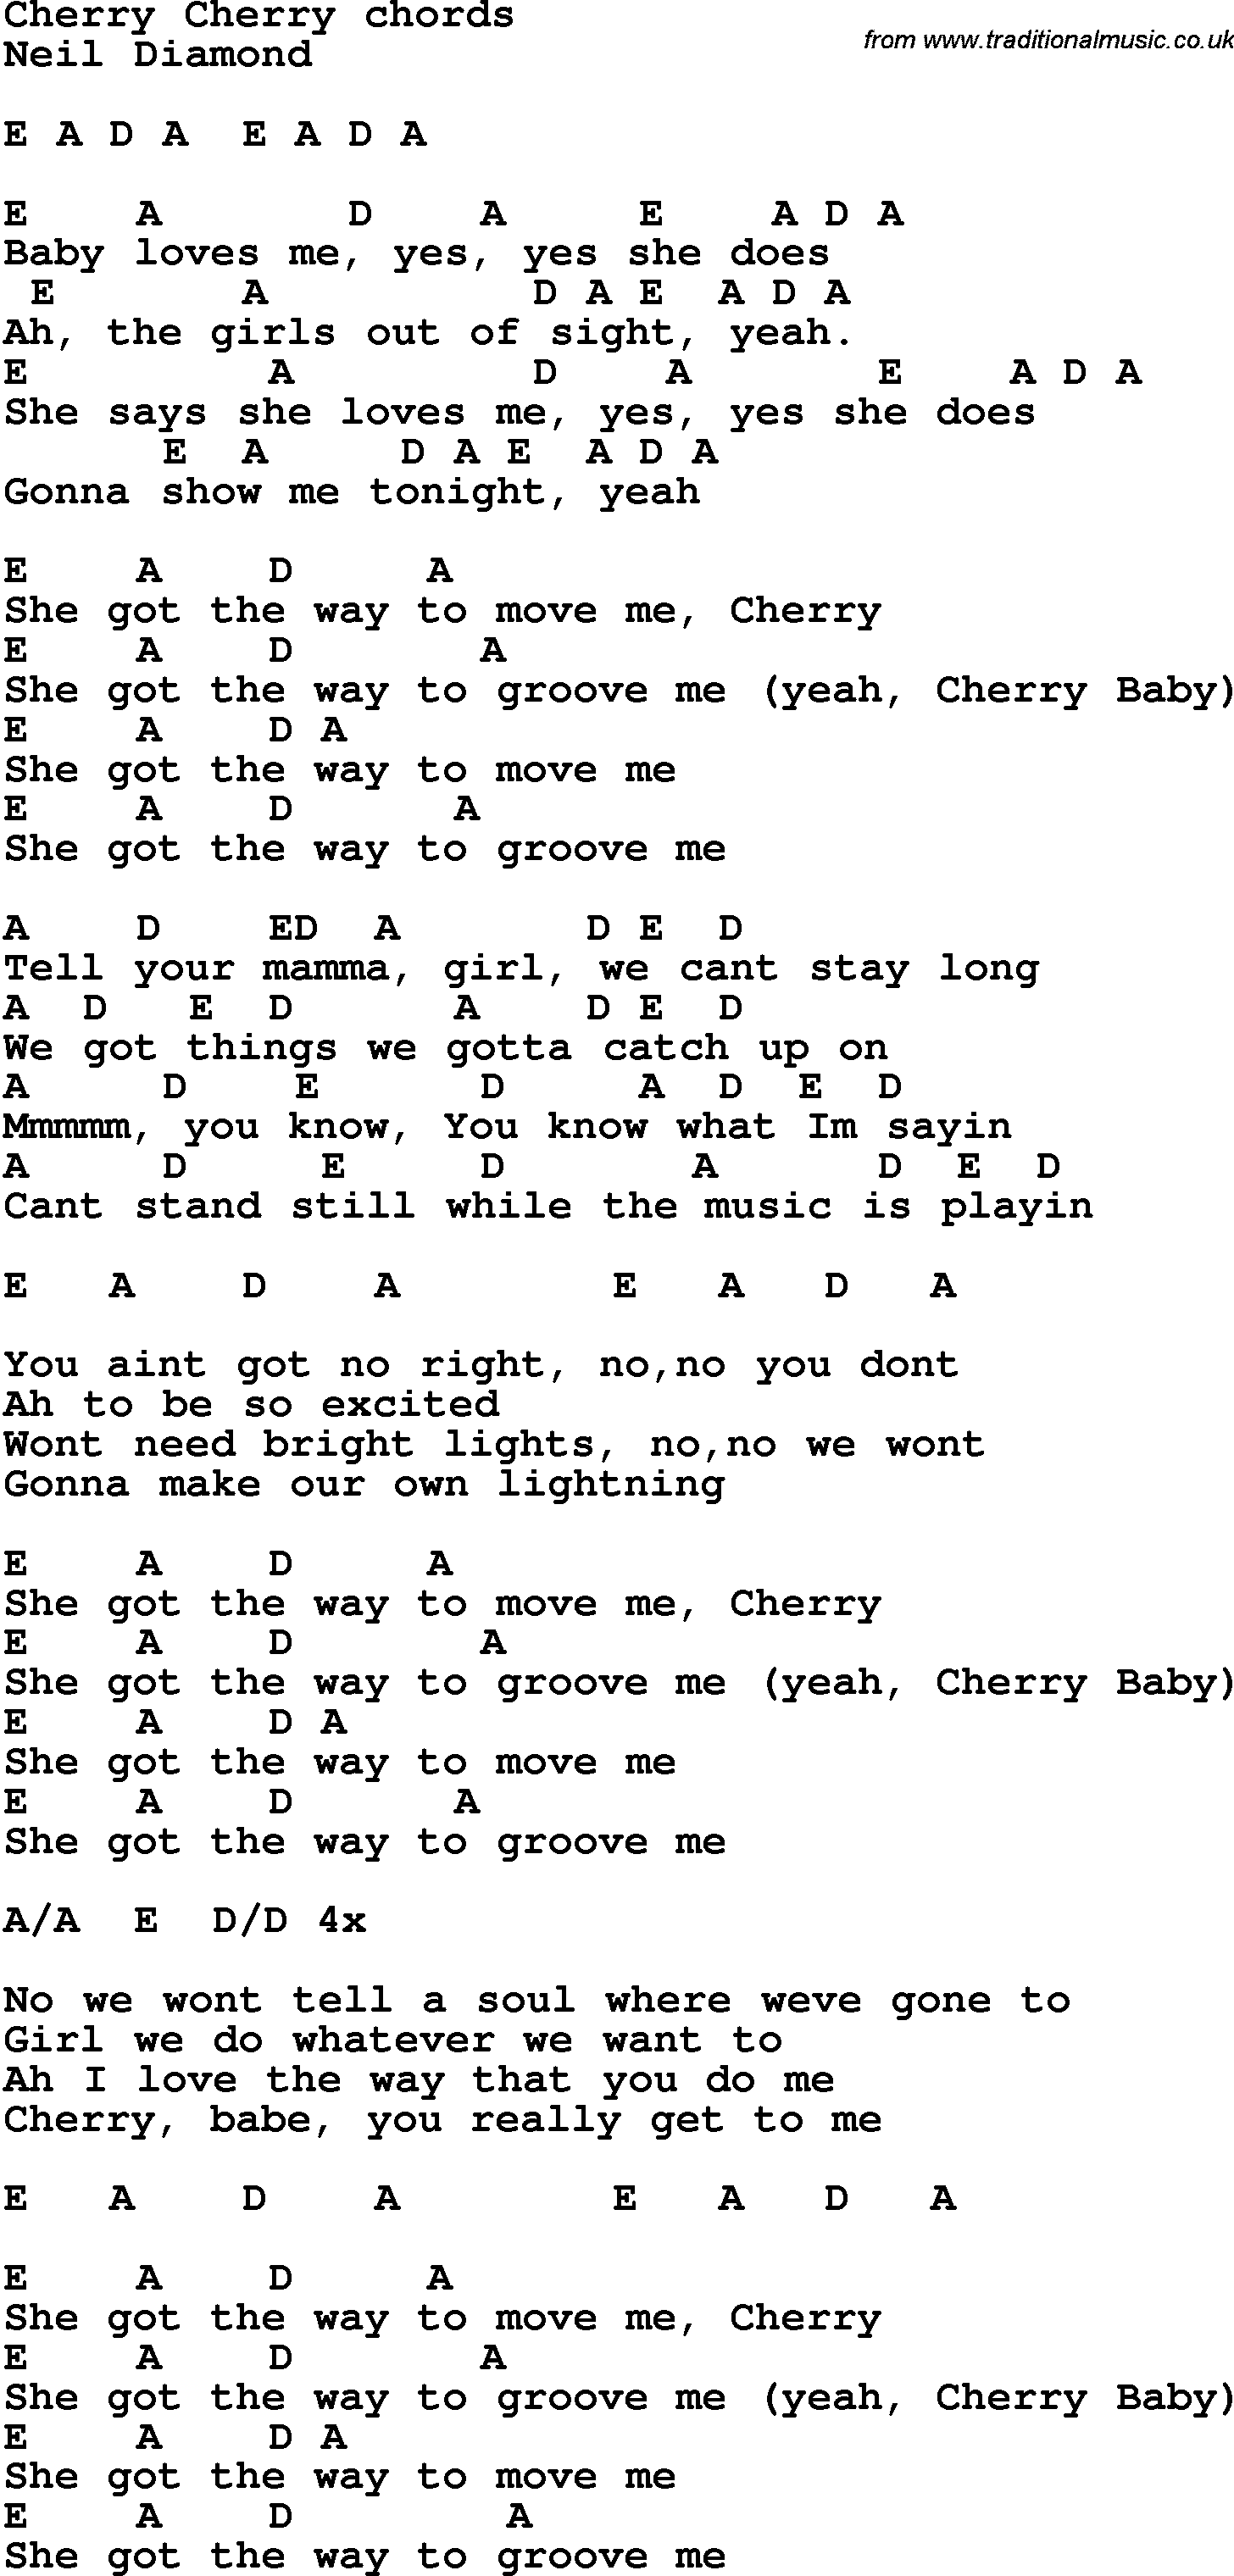 Song Lyrics with guitar chords for Cherry Cherry